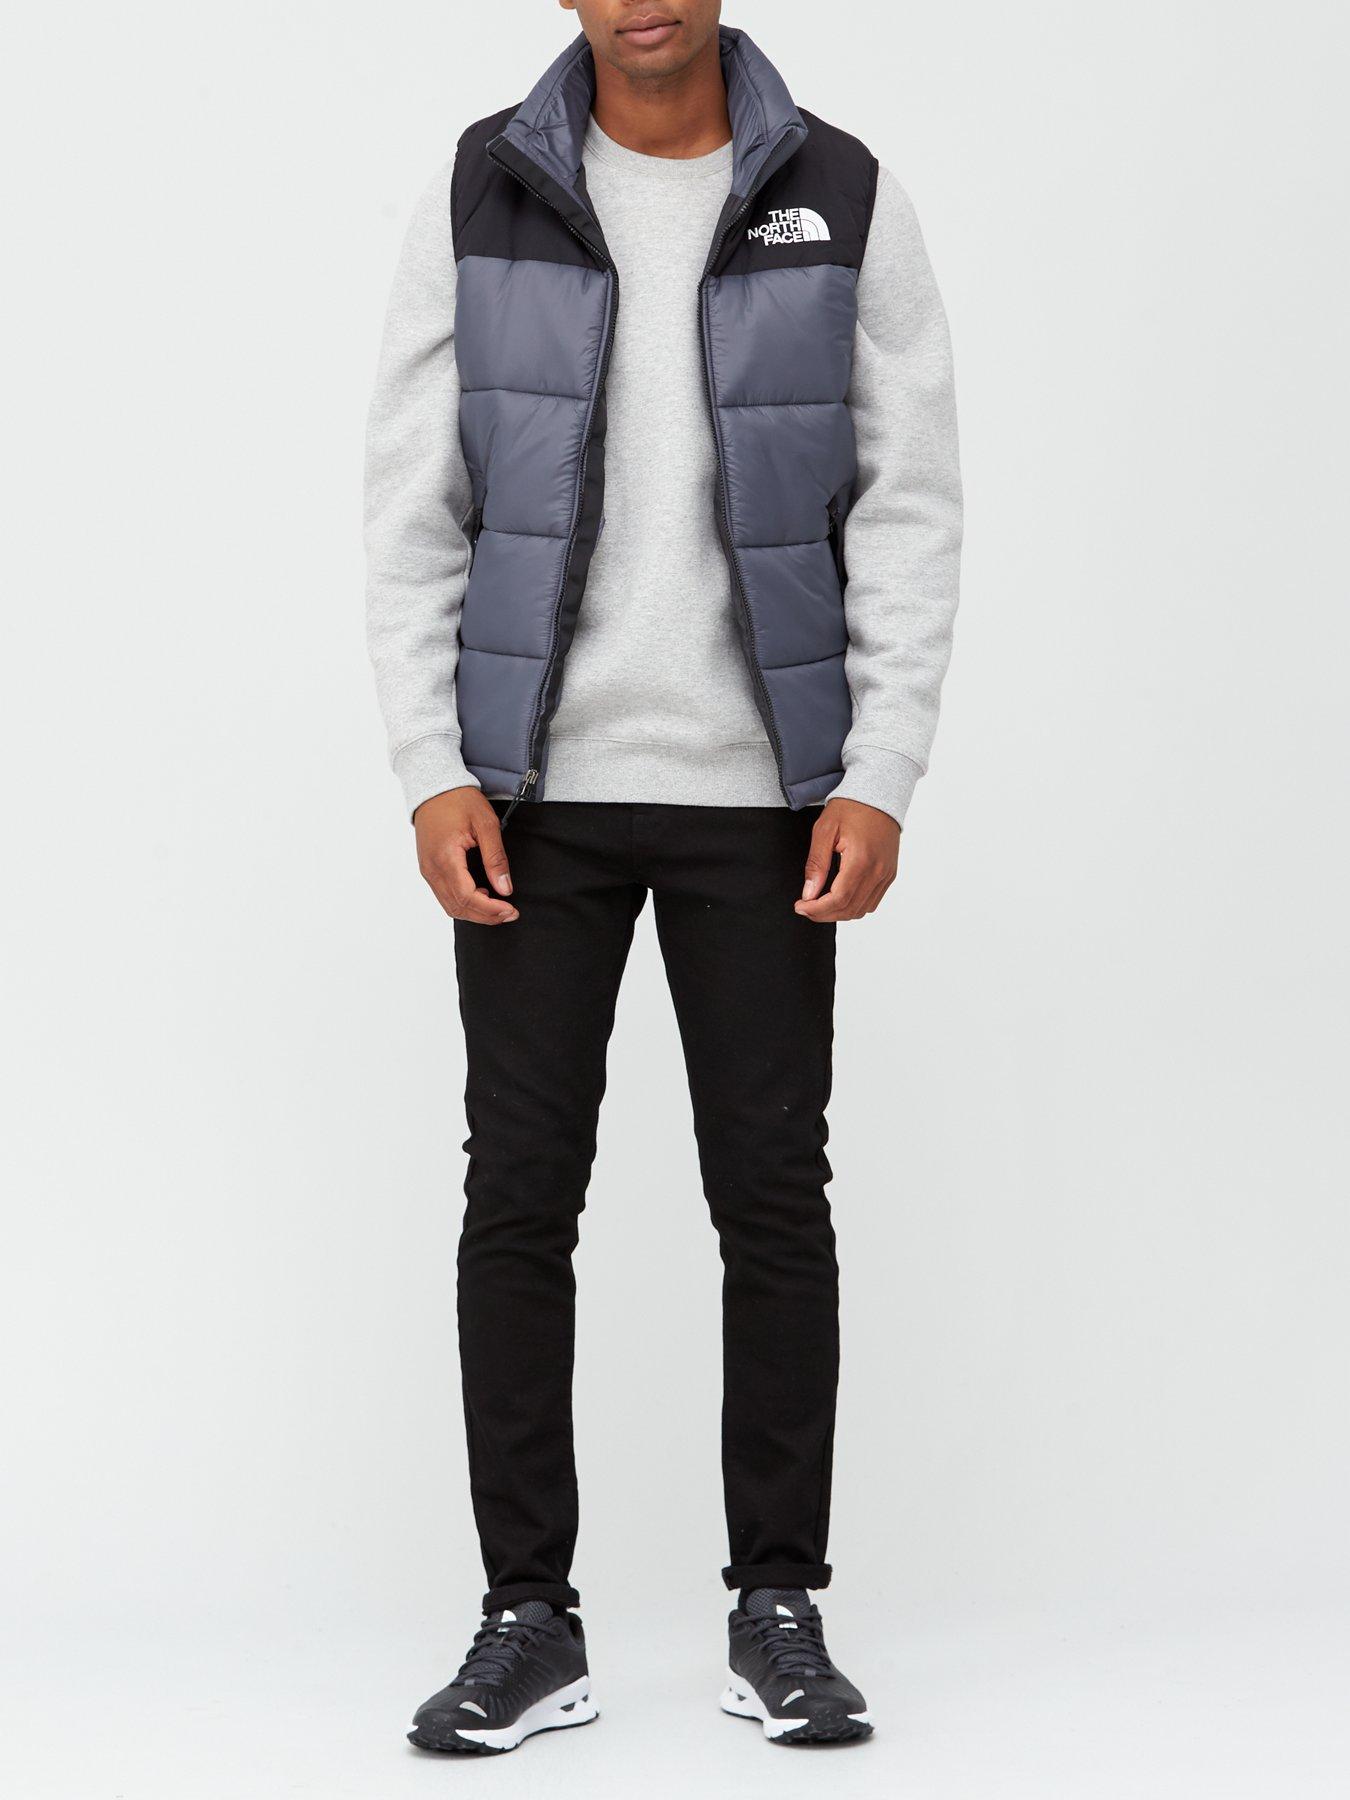 THE NORTH FACE Himalayan Insulated Vest 